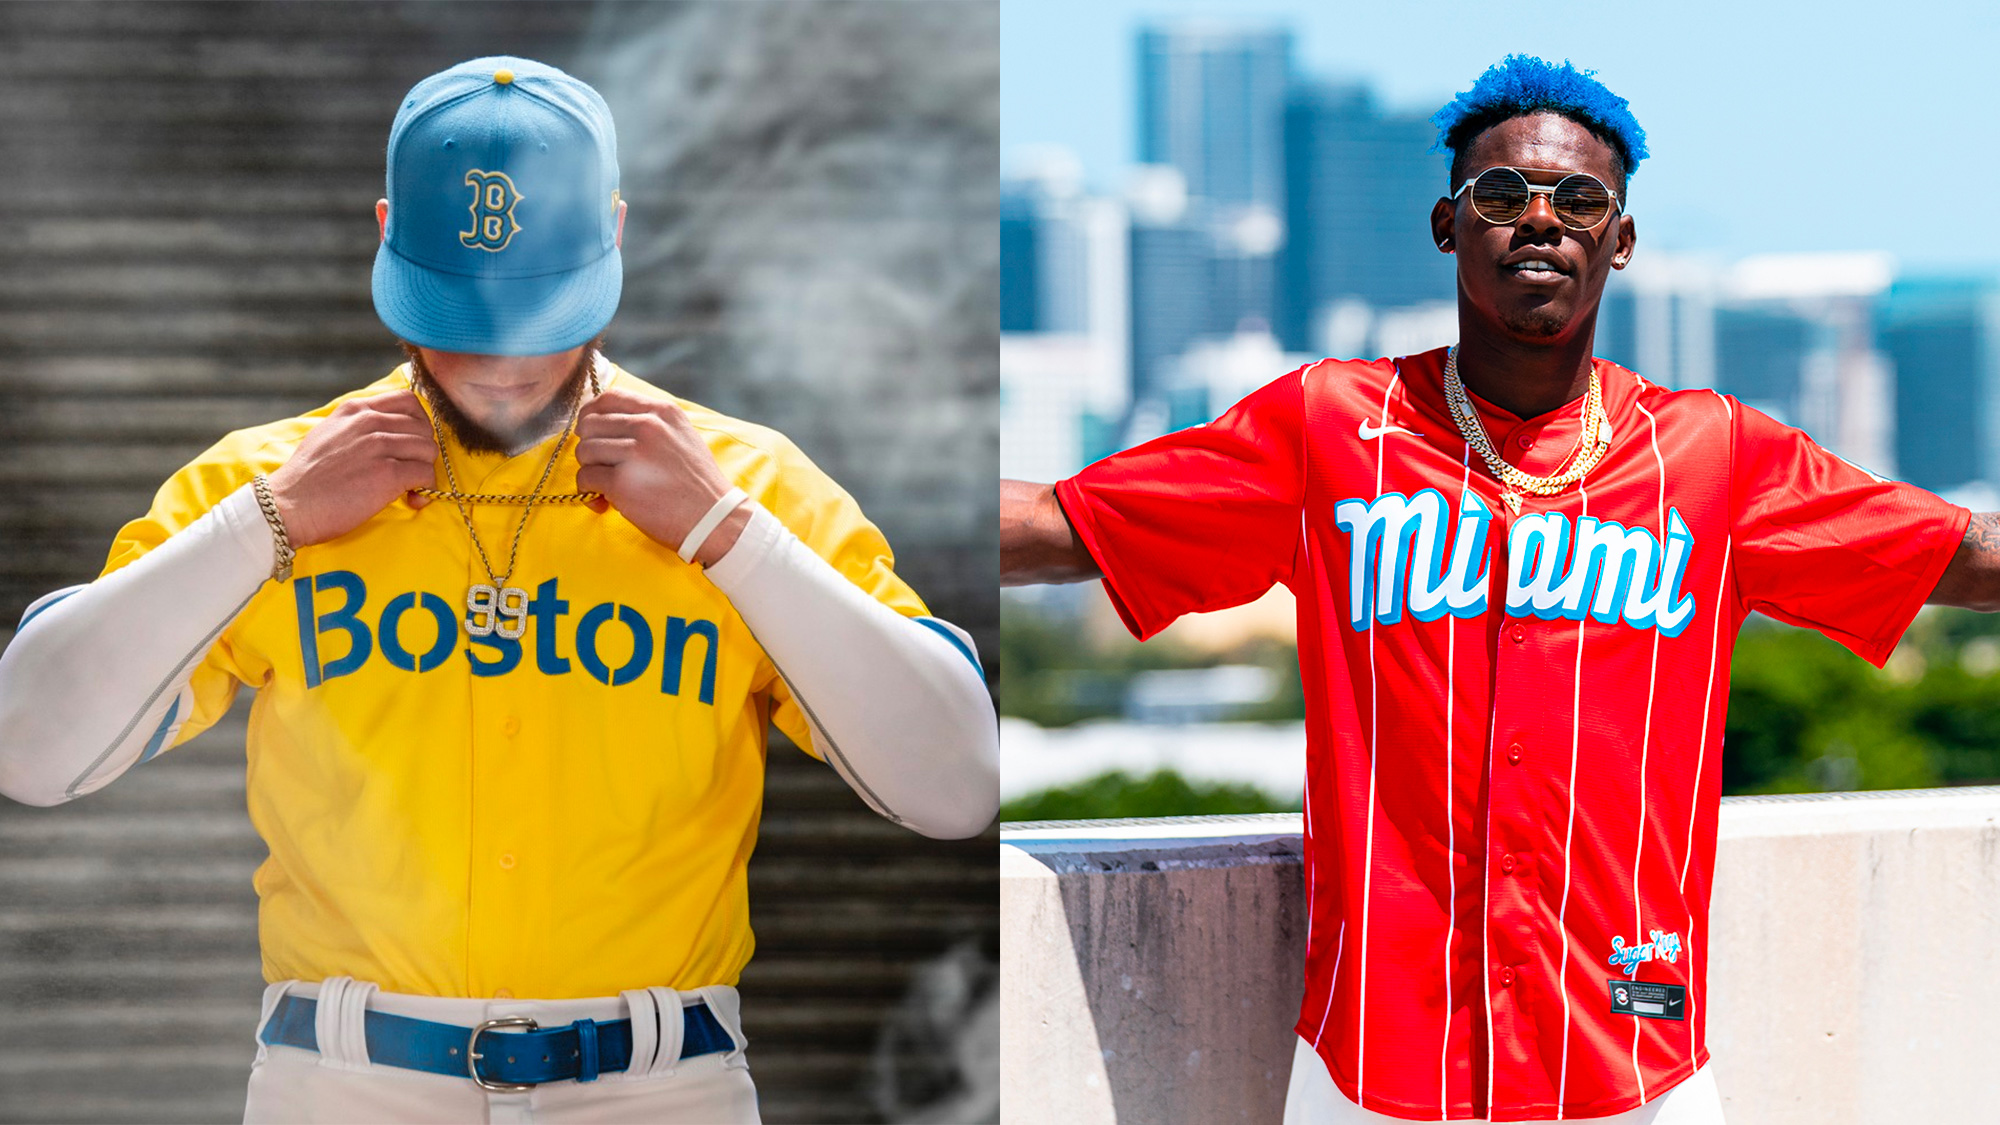 MLB - All of the 2021 City Connect uniforms have been